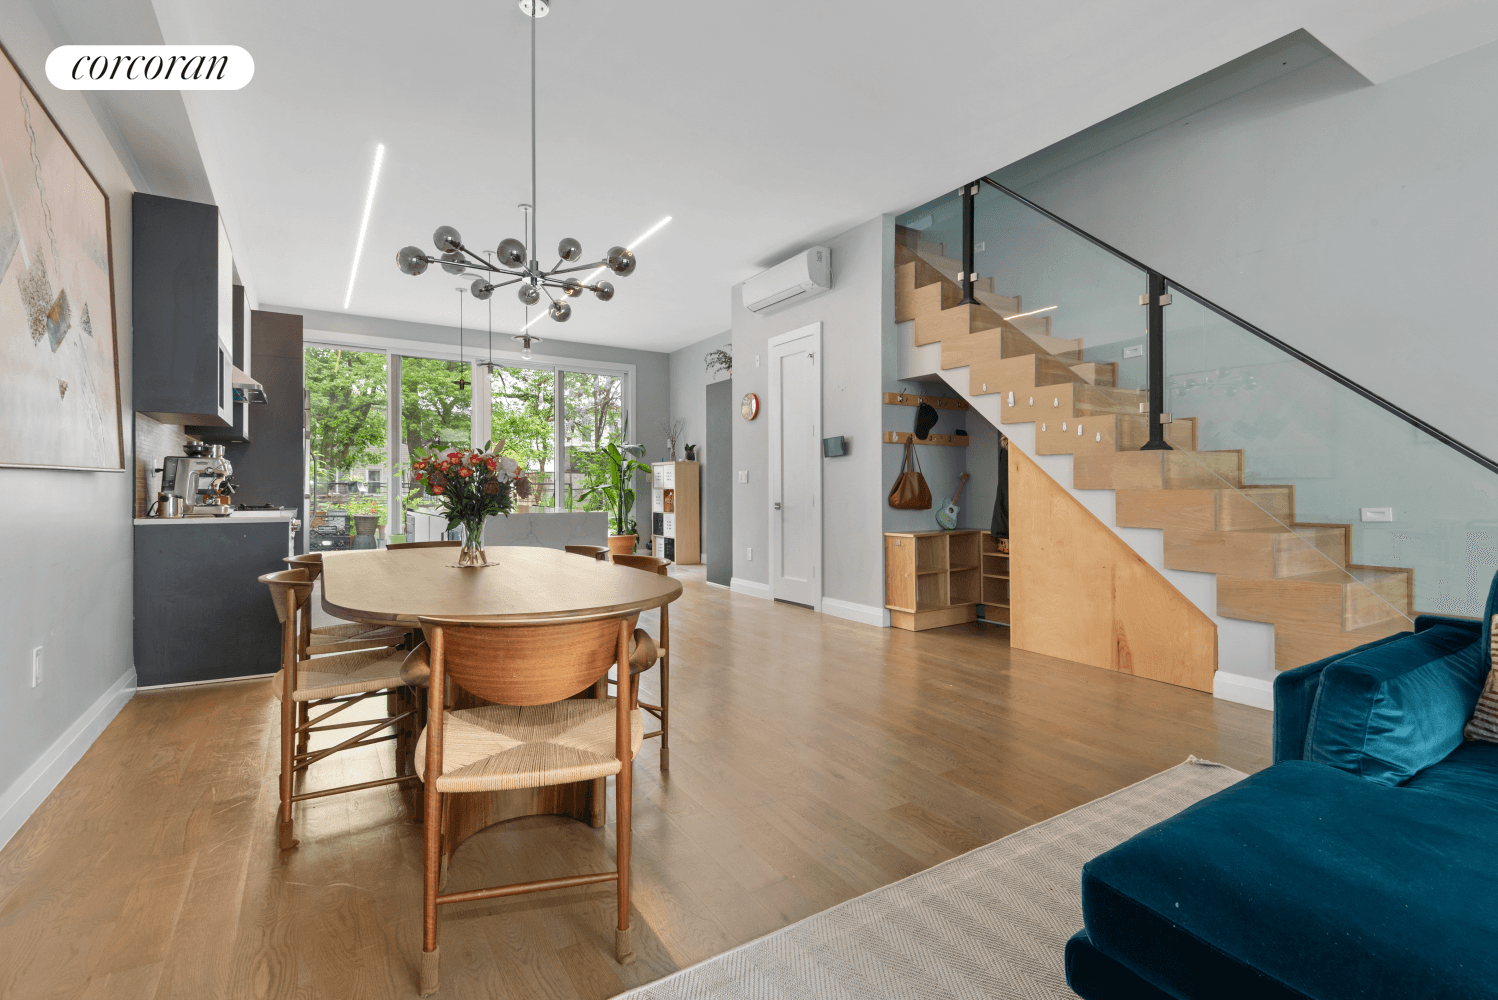 36 Madison Street is a completely renovated townhouse on a picturesque tree lined street offers the perfect blend of Brooklyn charm and modern convenience.